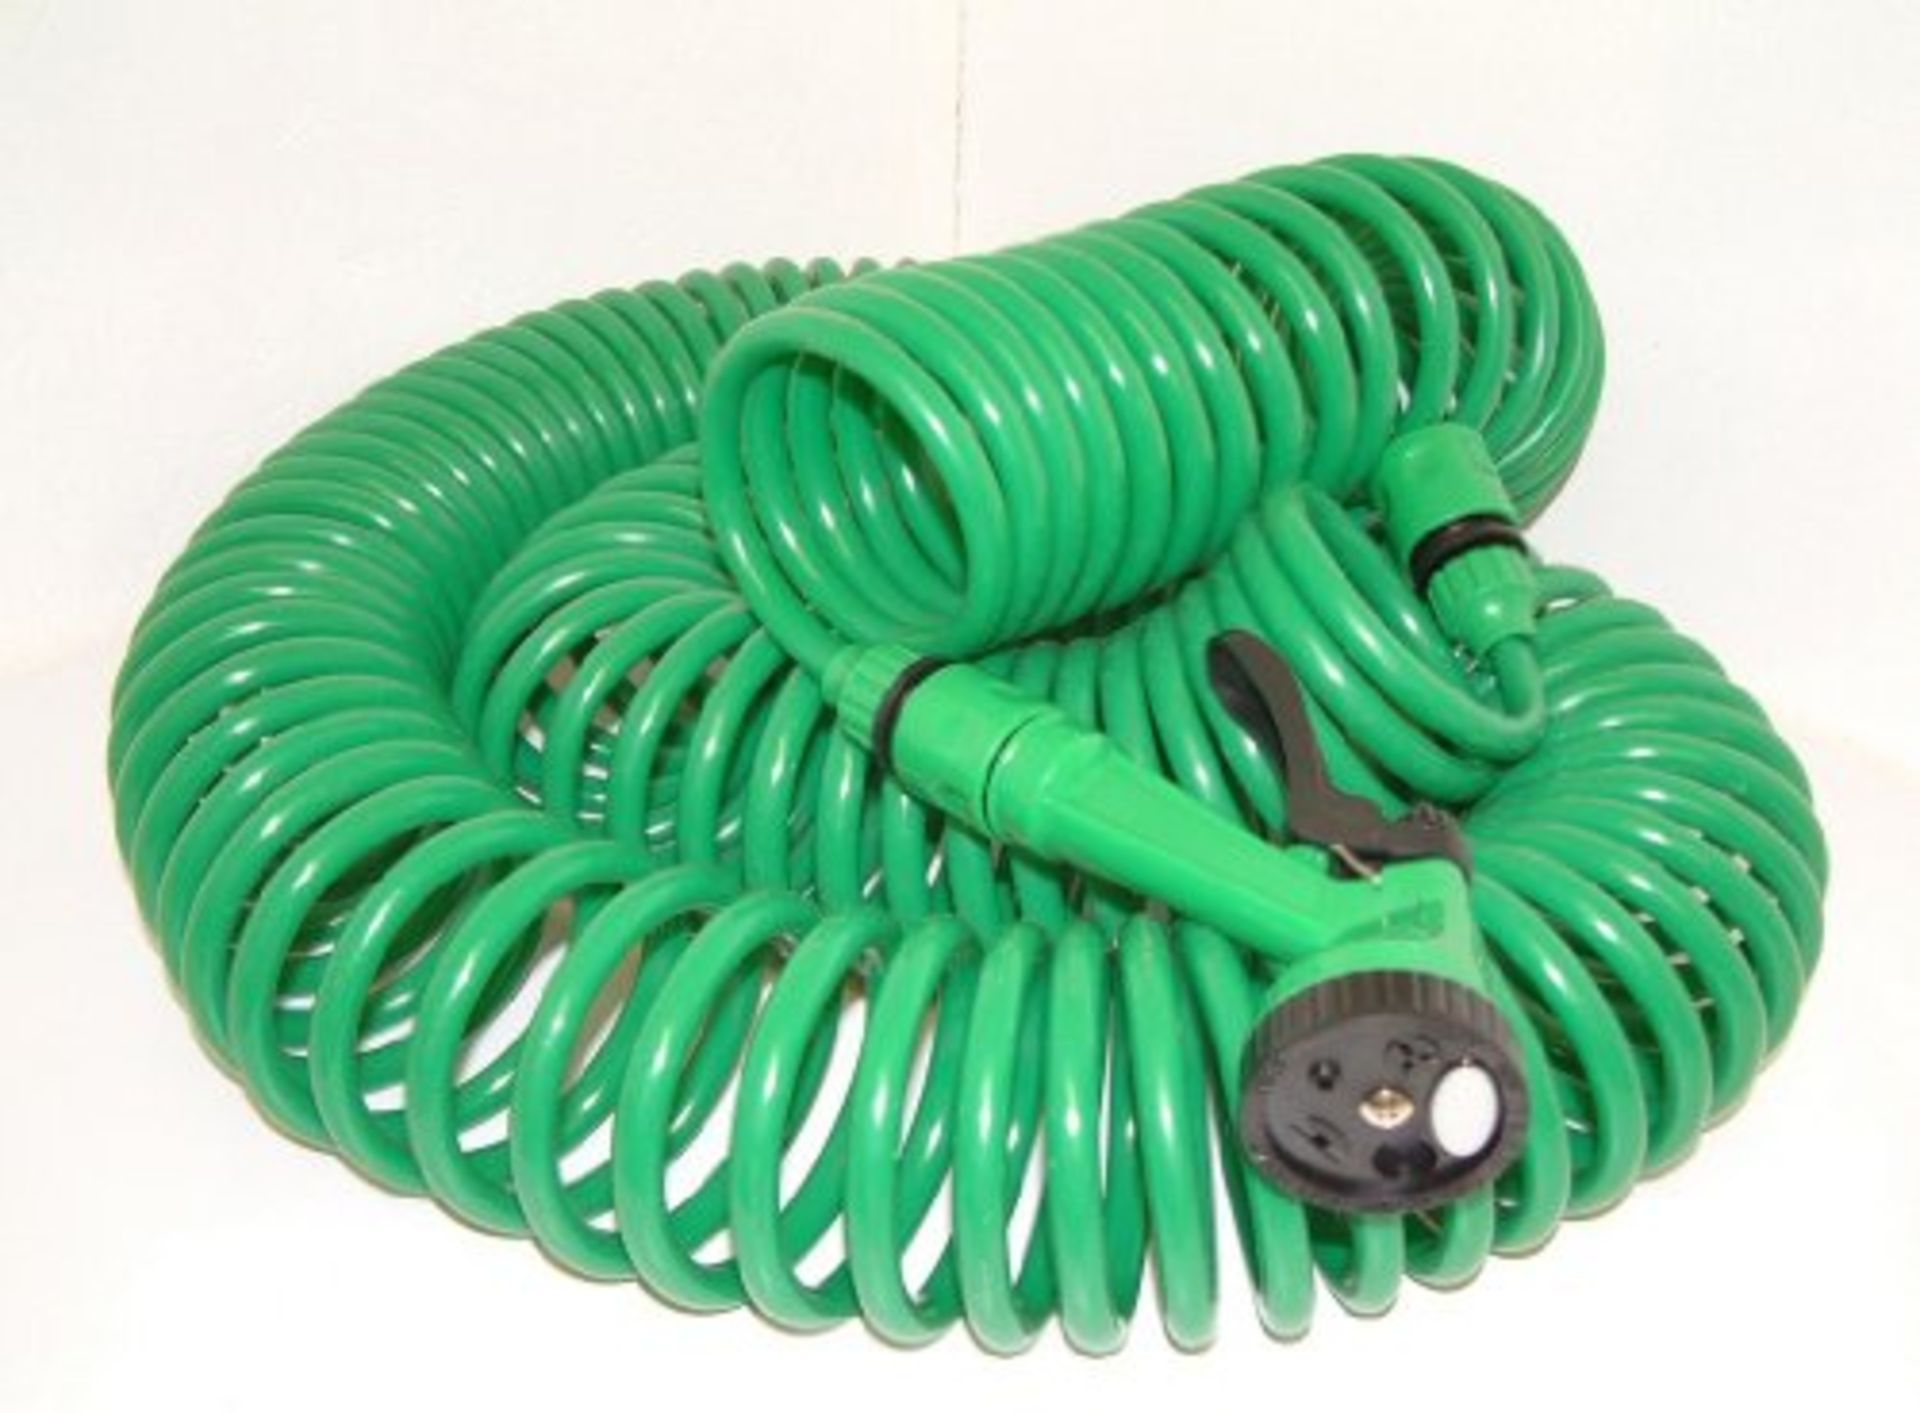 30 Metre Coil Hose With Nozzle And Tap Connectors Etc - Image 4 of 4